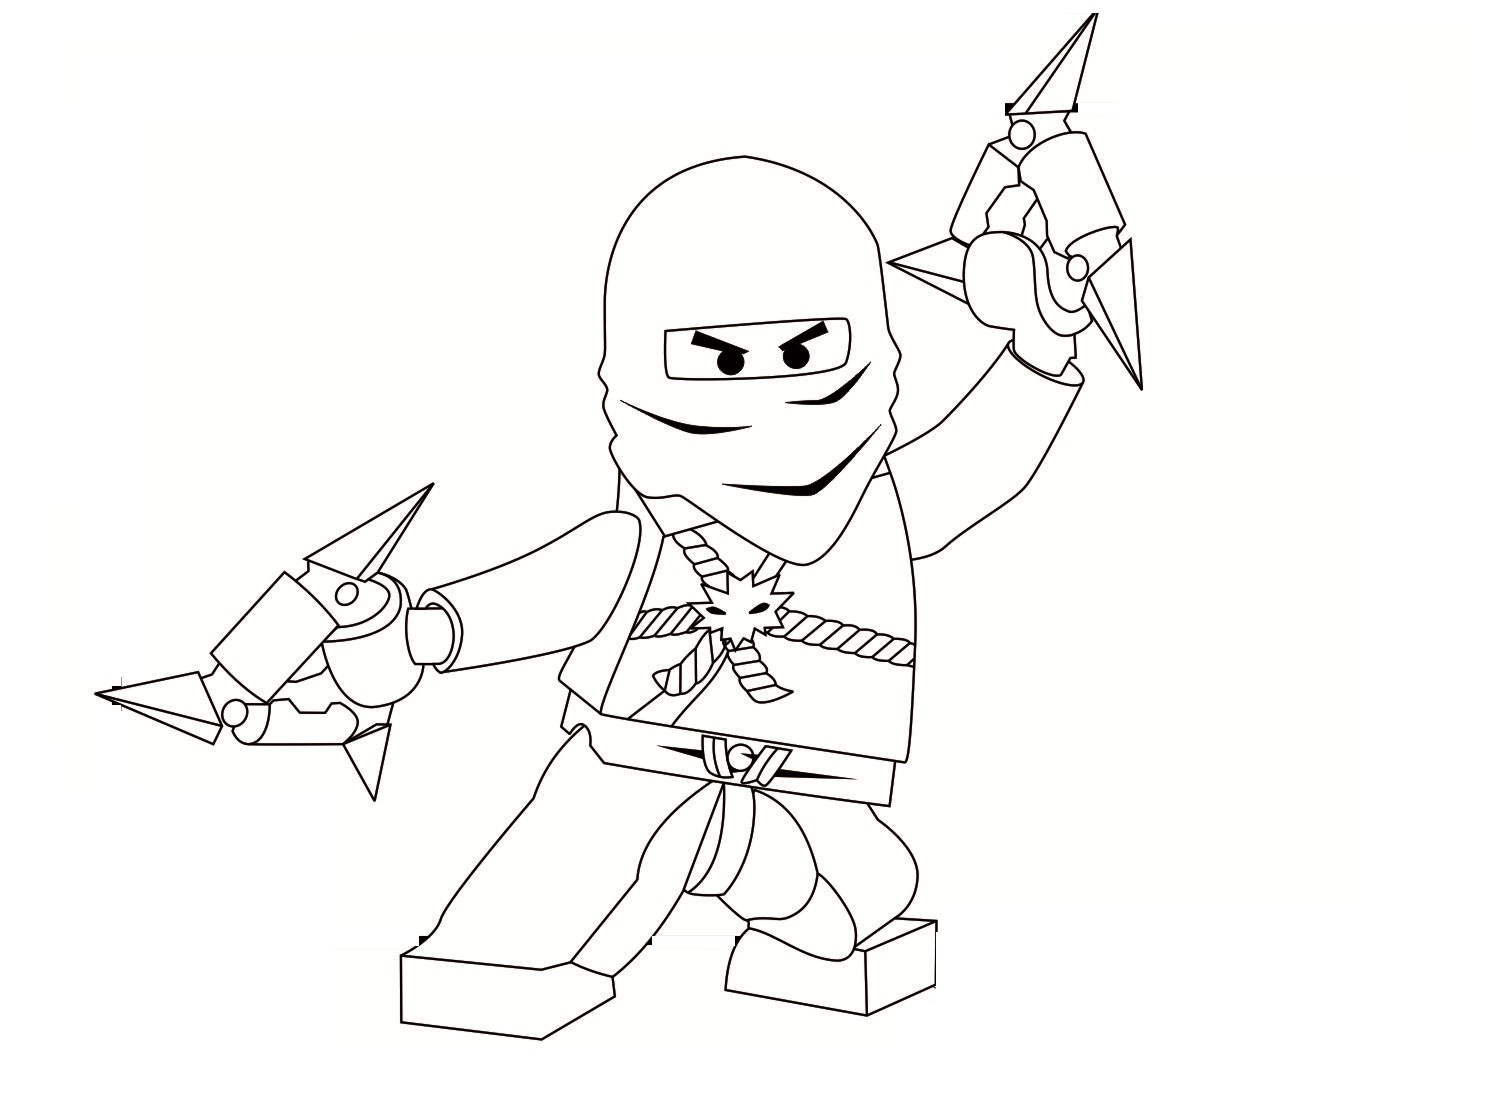 Free Printable Ninjago Coloring Pages For Kids HD Wallpapers Download Free Images Wallpaper [wallpaper896.blogspot.com]